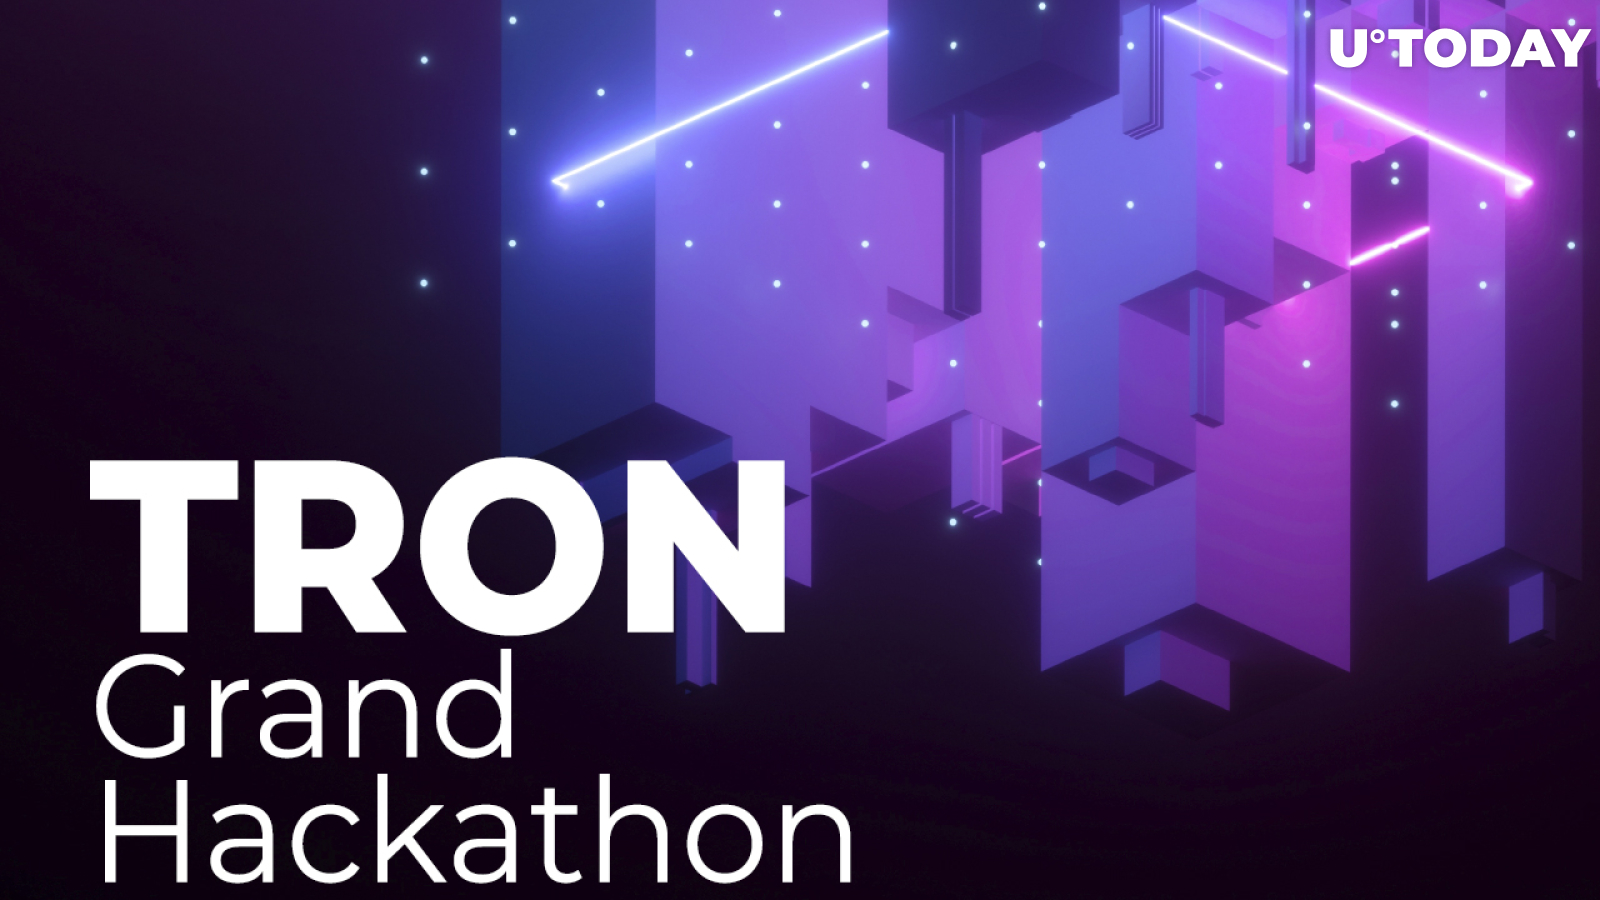 Tron DAO and BitTorrent Chain TRON Grand Hackathon Takes off With Introduction of New Community Forum